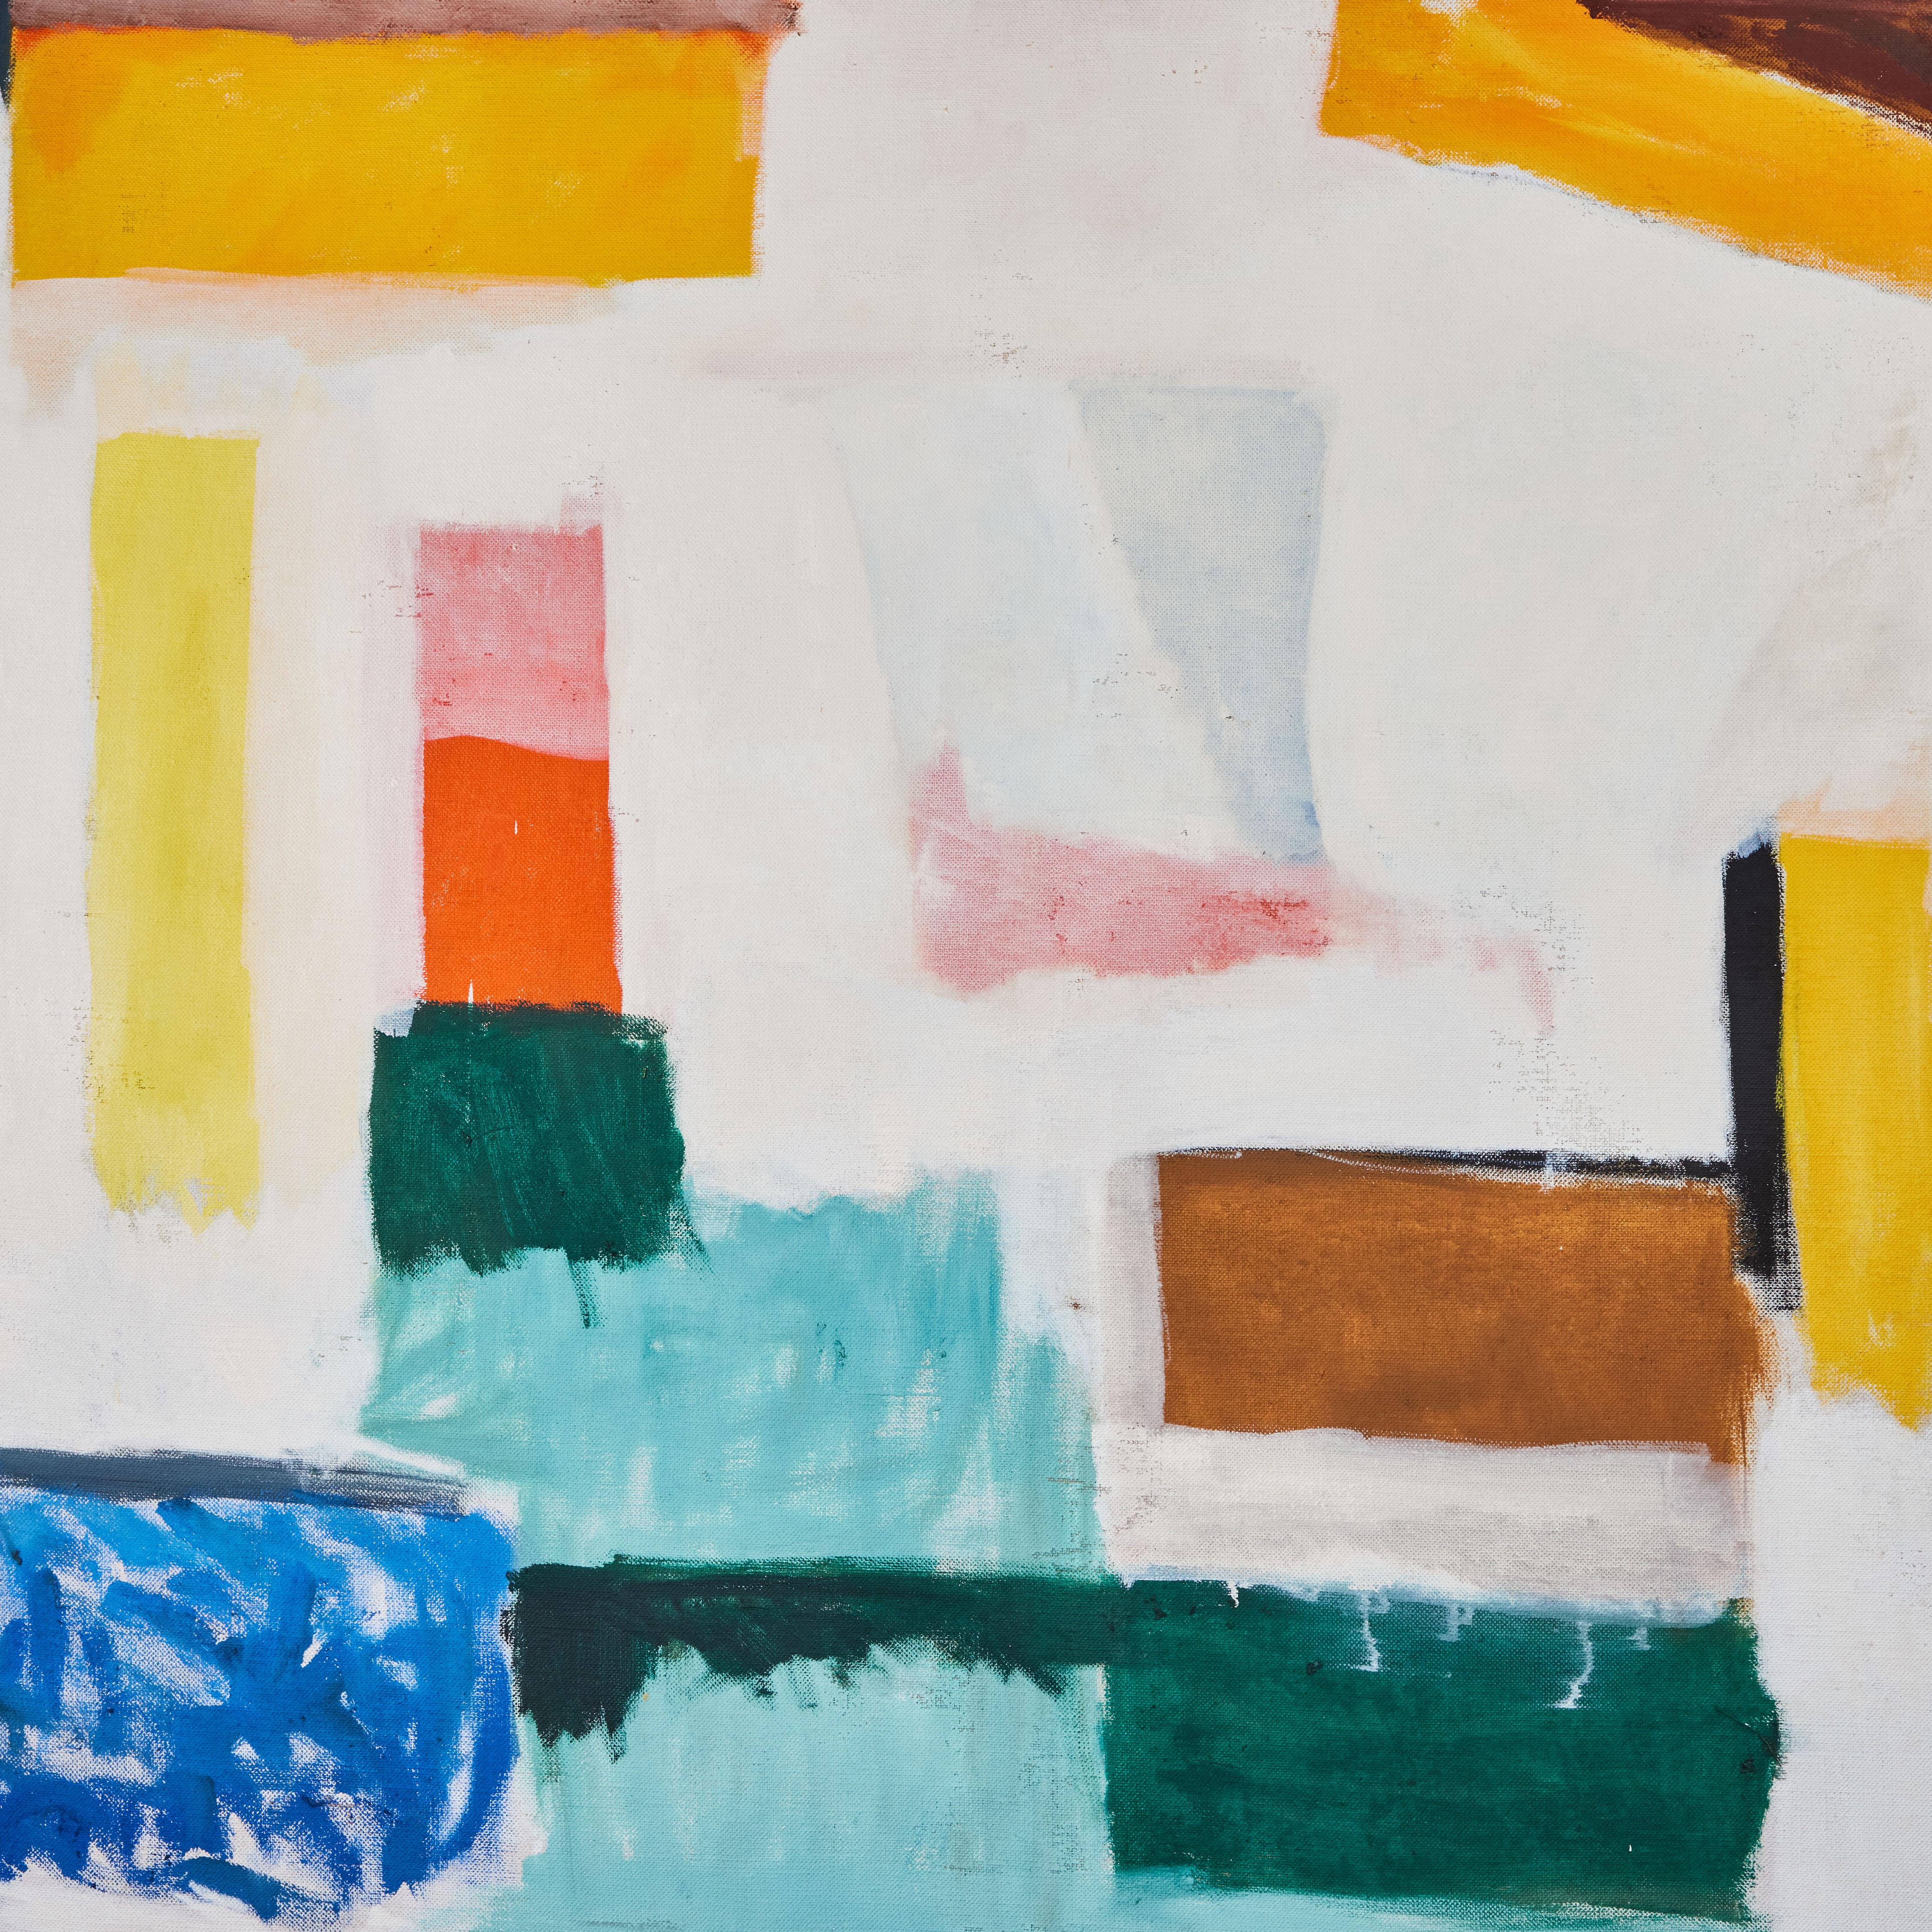 Untitled oil on canvas, signed and dated 1988 by American artist Giorgio Cavallon (1904-1989) on the reverse.   Cavallon was a founding member of the American Abstract Artists and a pioneer Abstract Expressionist.  Canvas:  50”H x 54”W